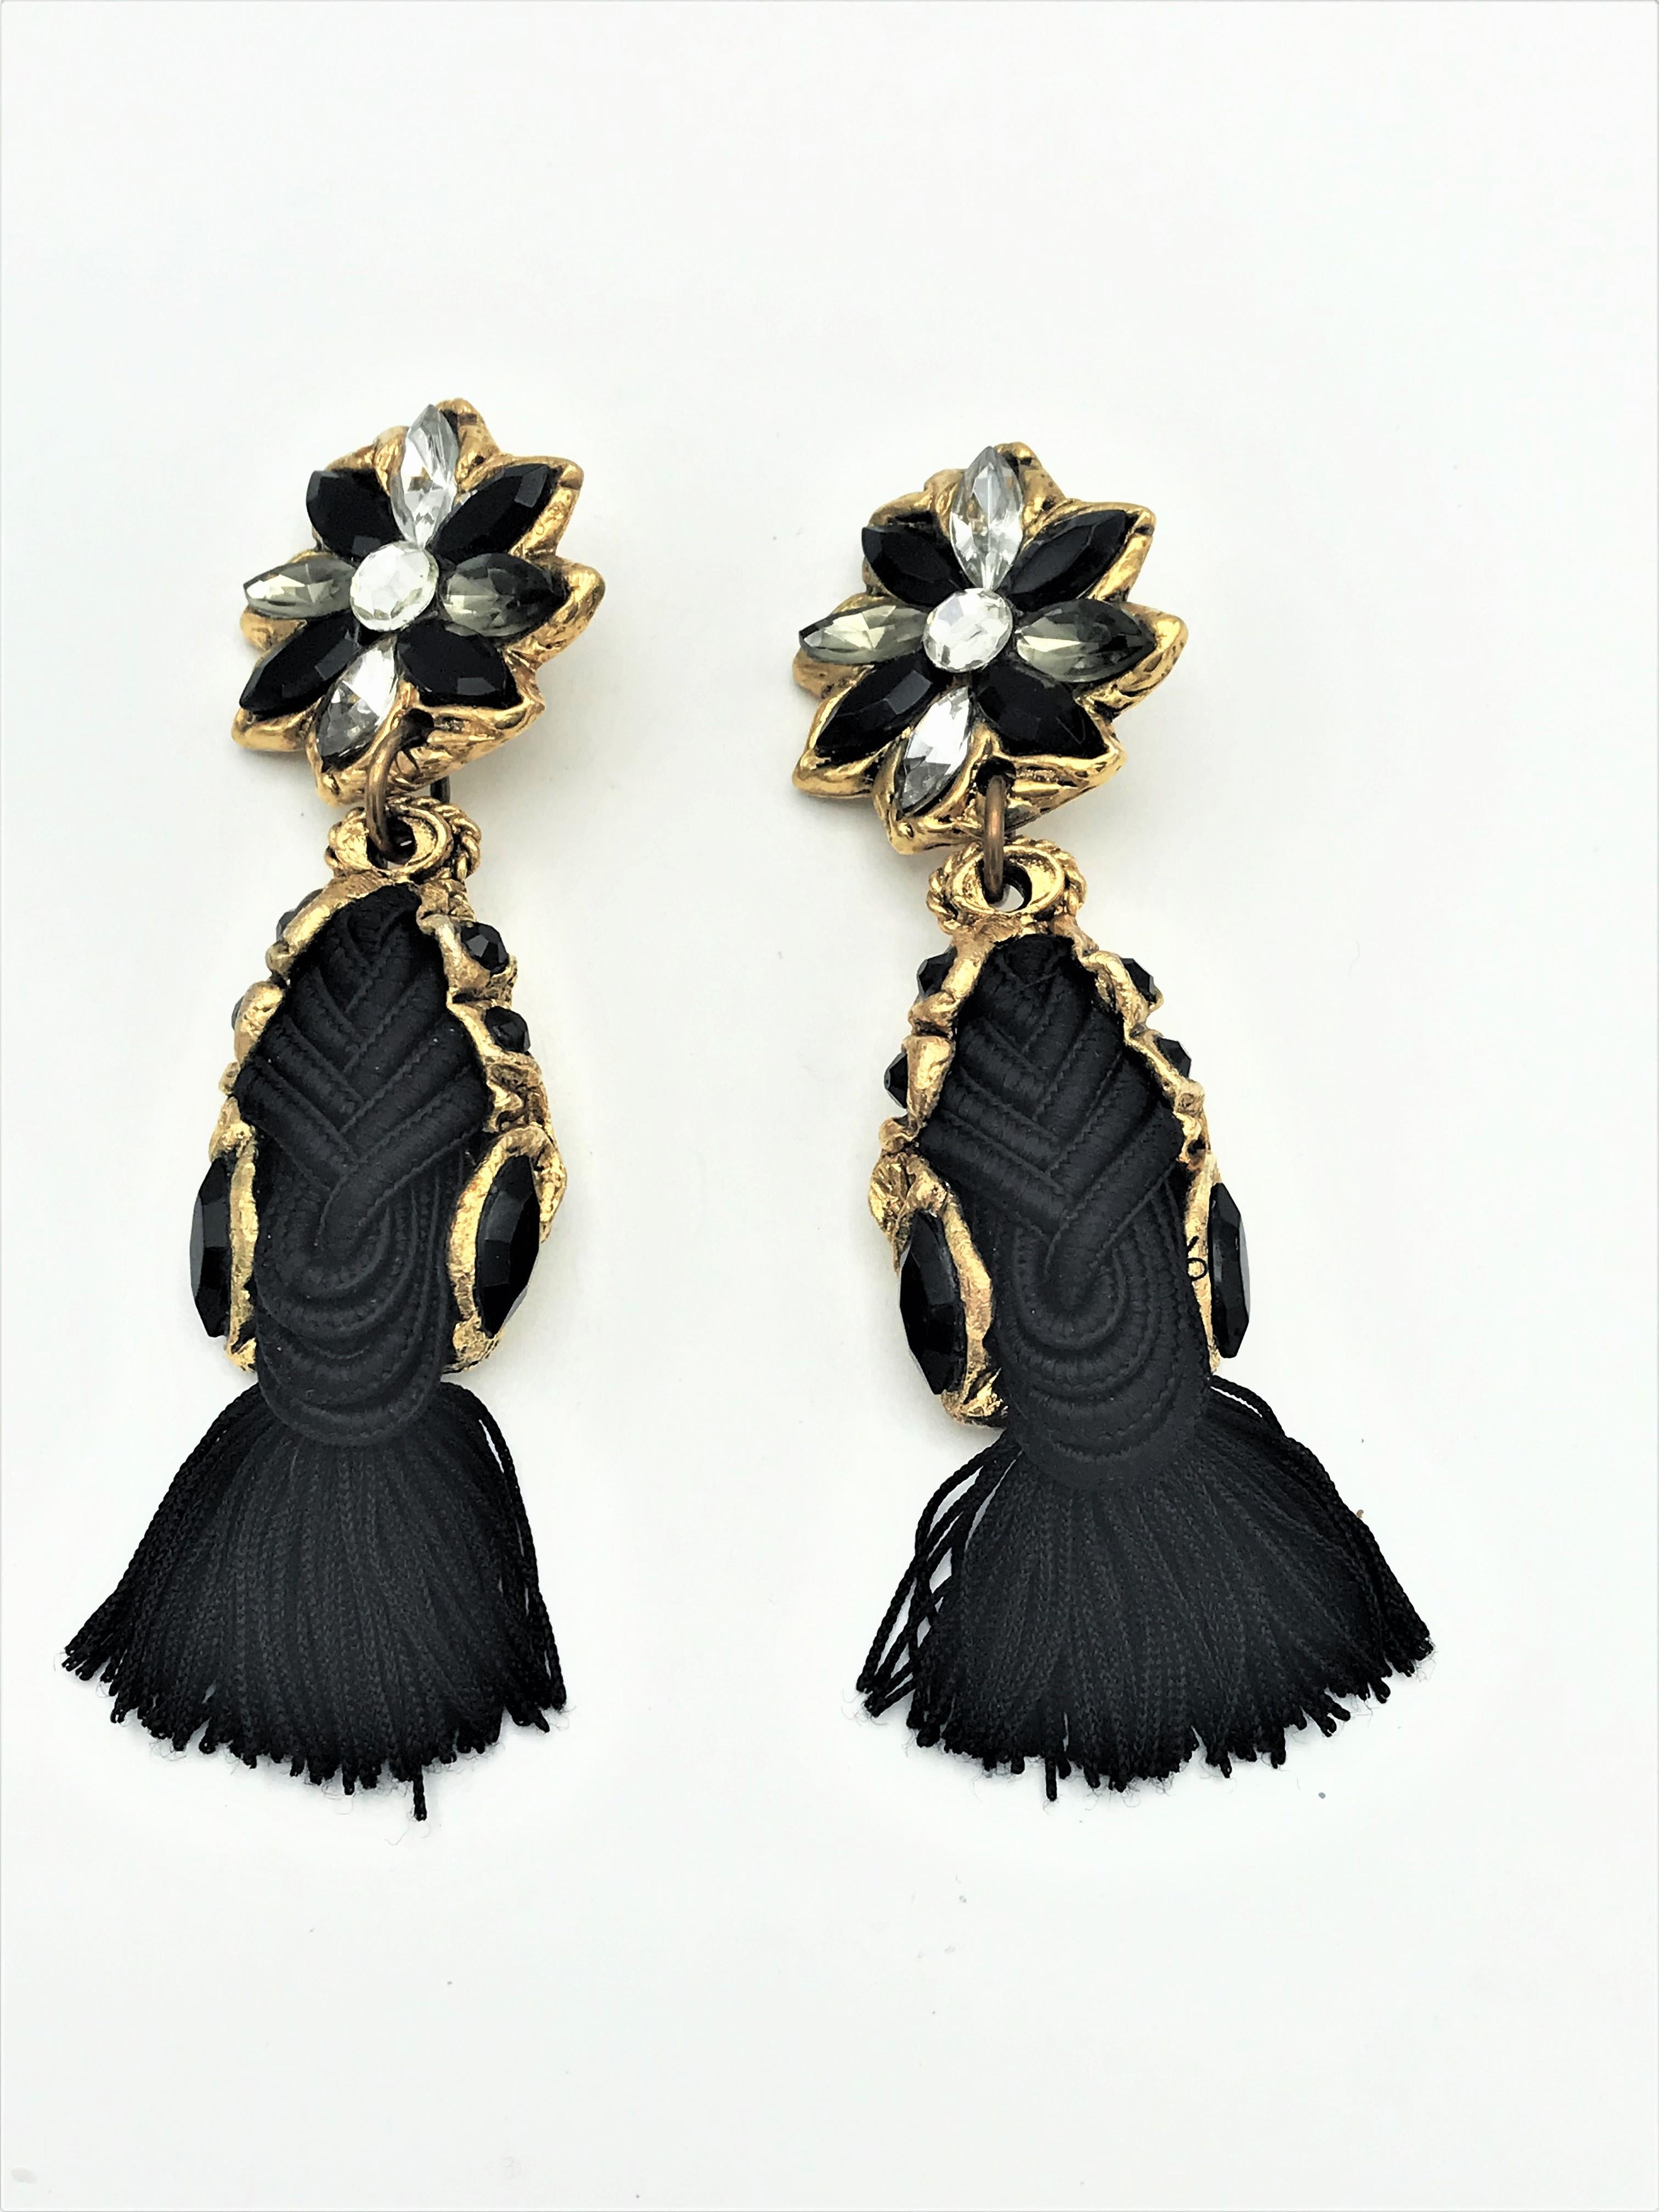 Very decorative long black ear clips made of gold colored resin and fine black trimmings cord. The upper part is a star with black and clear rhinestones. A very individual and beautifully crafted clip.
Dimensions: Whole length 12 cm. Star 4 cm in